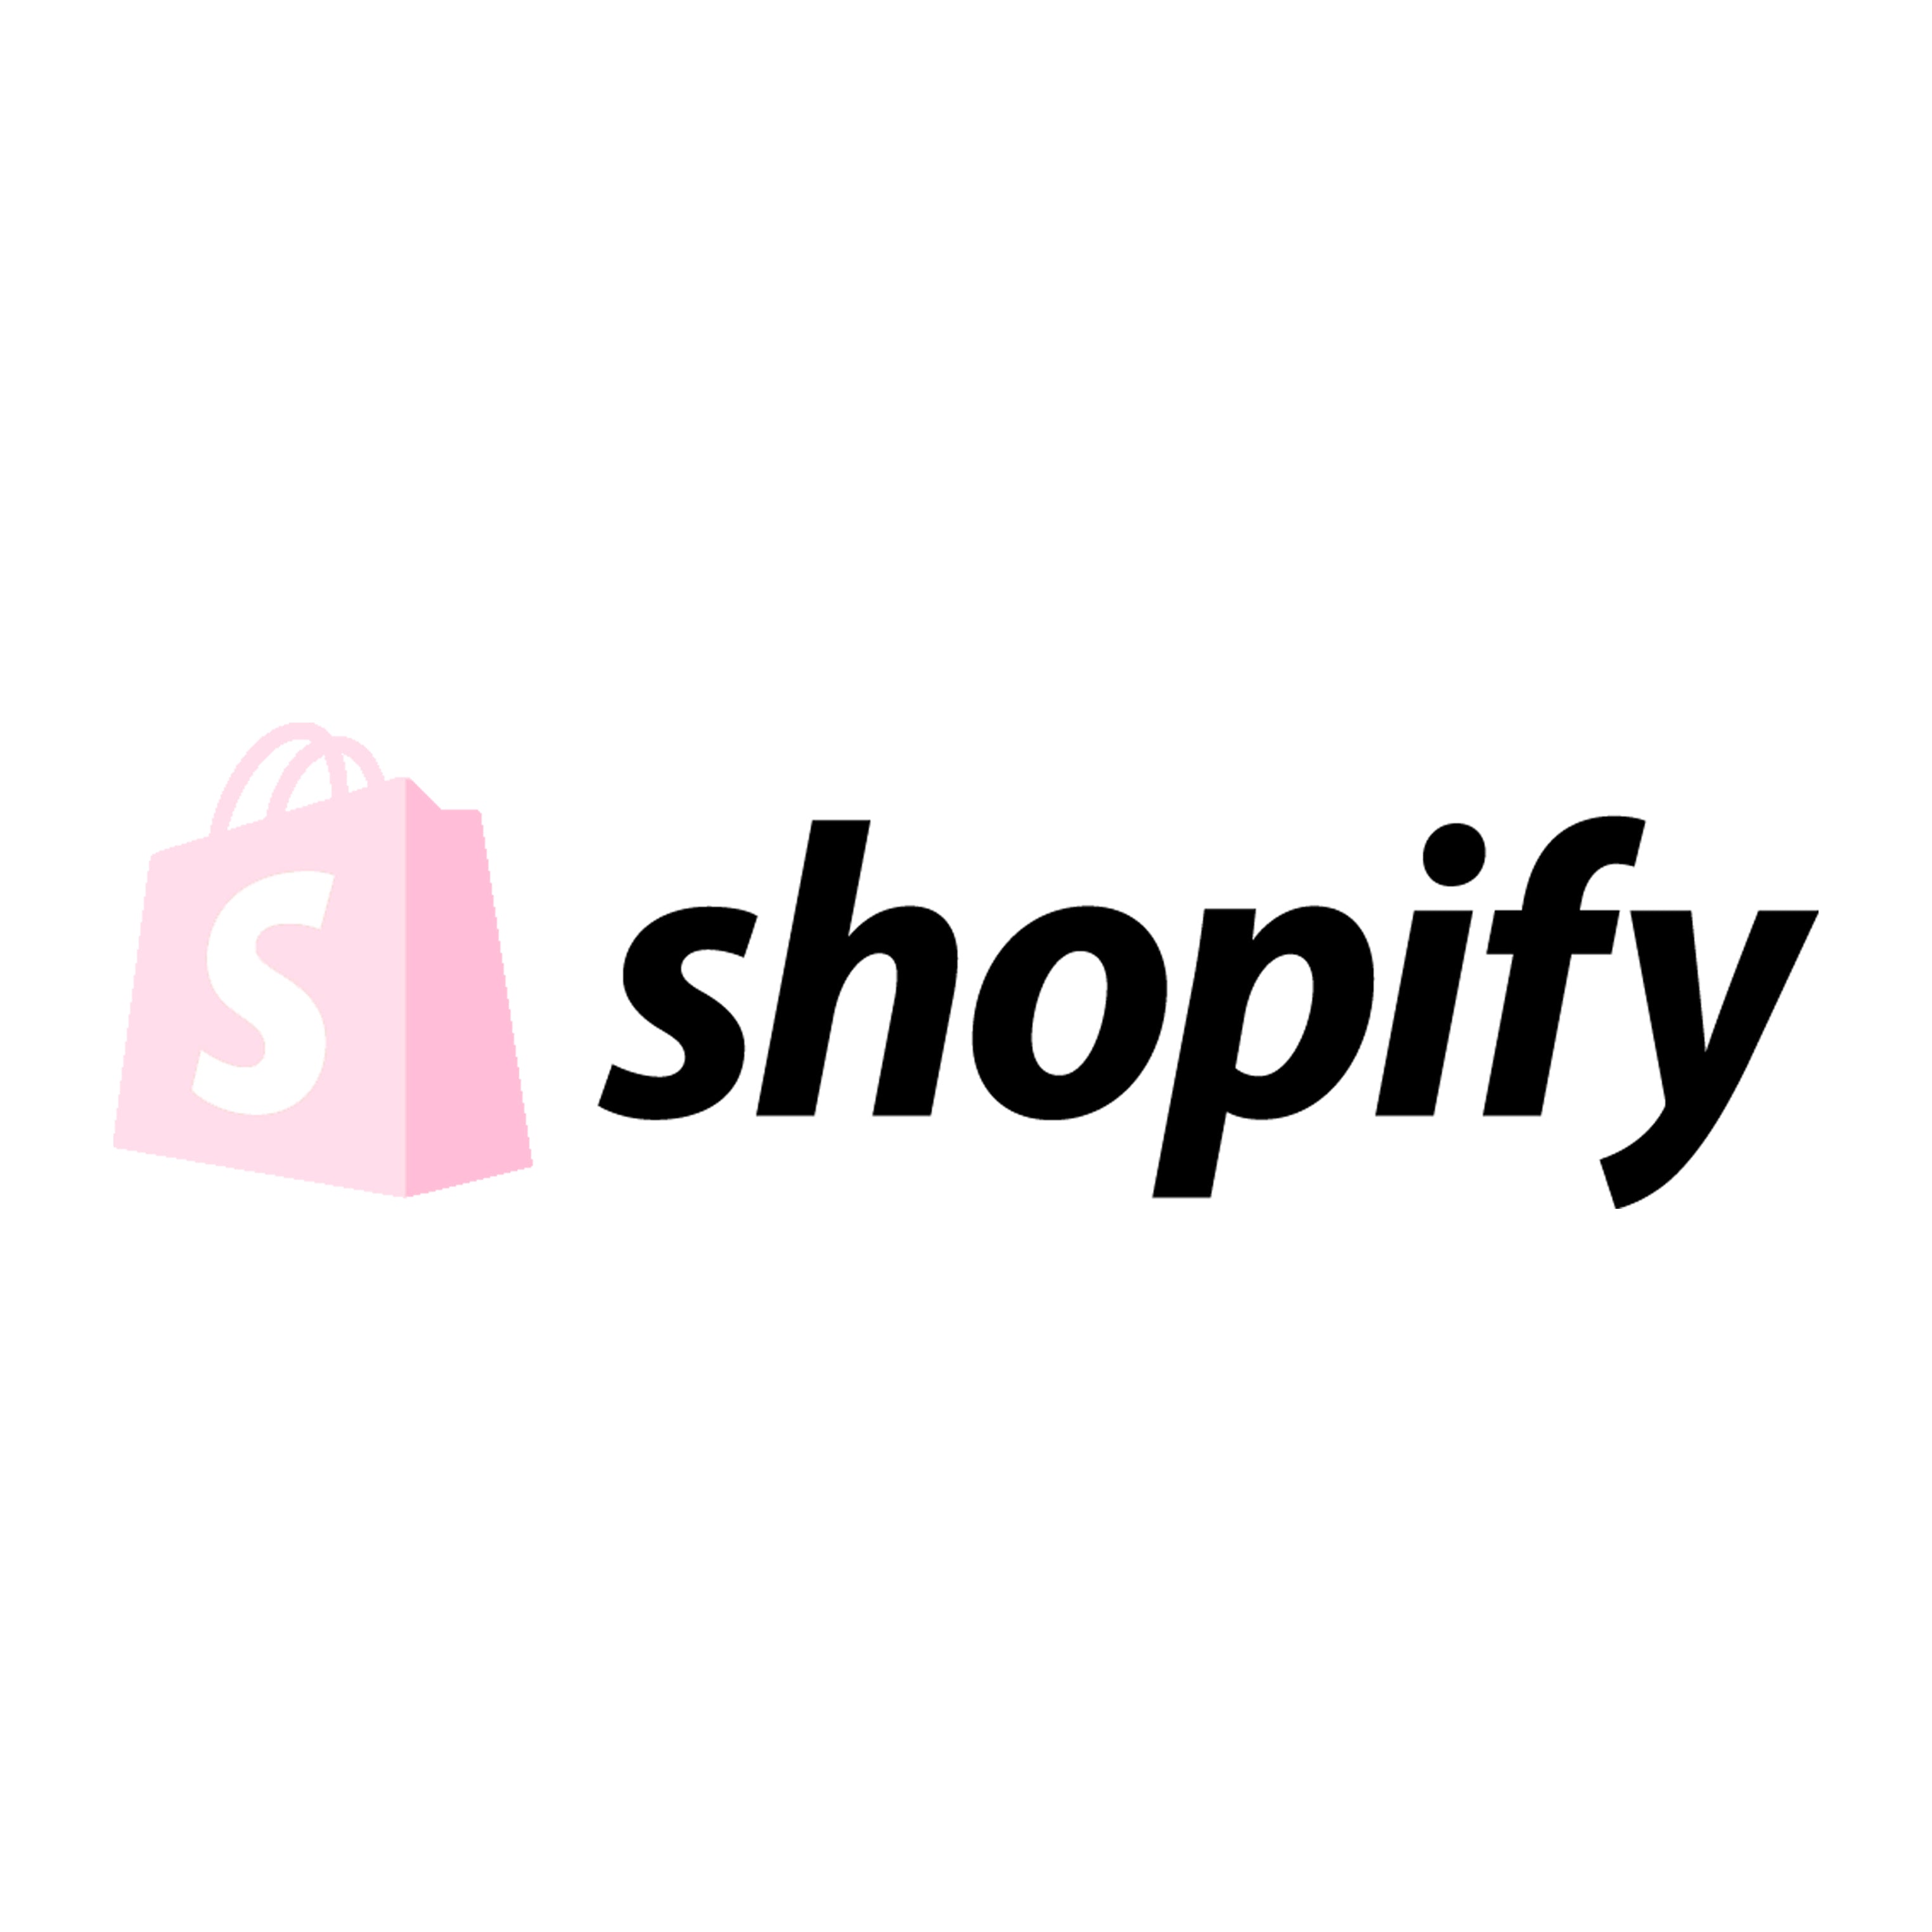 How to list products on Shopify